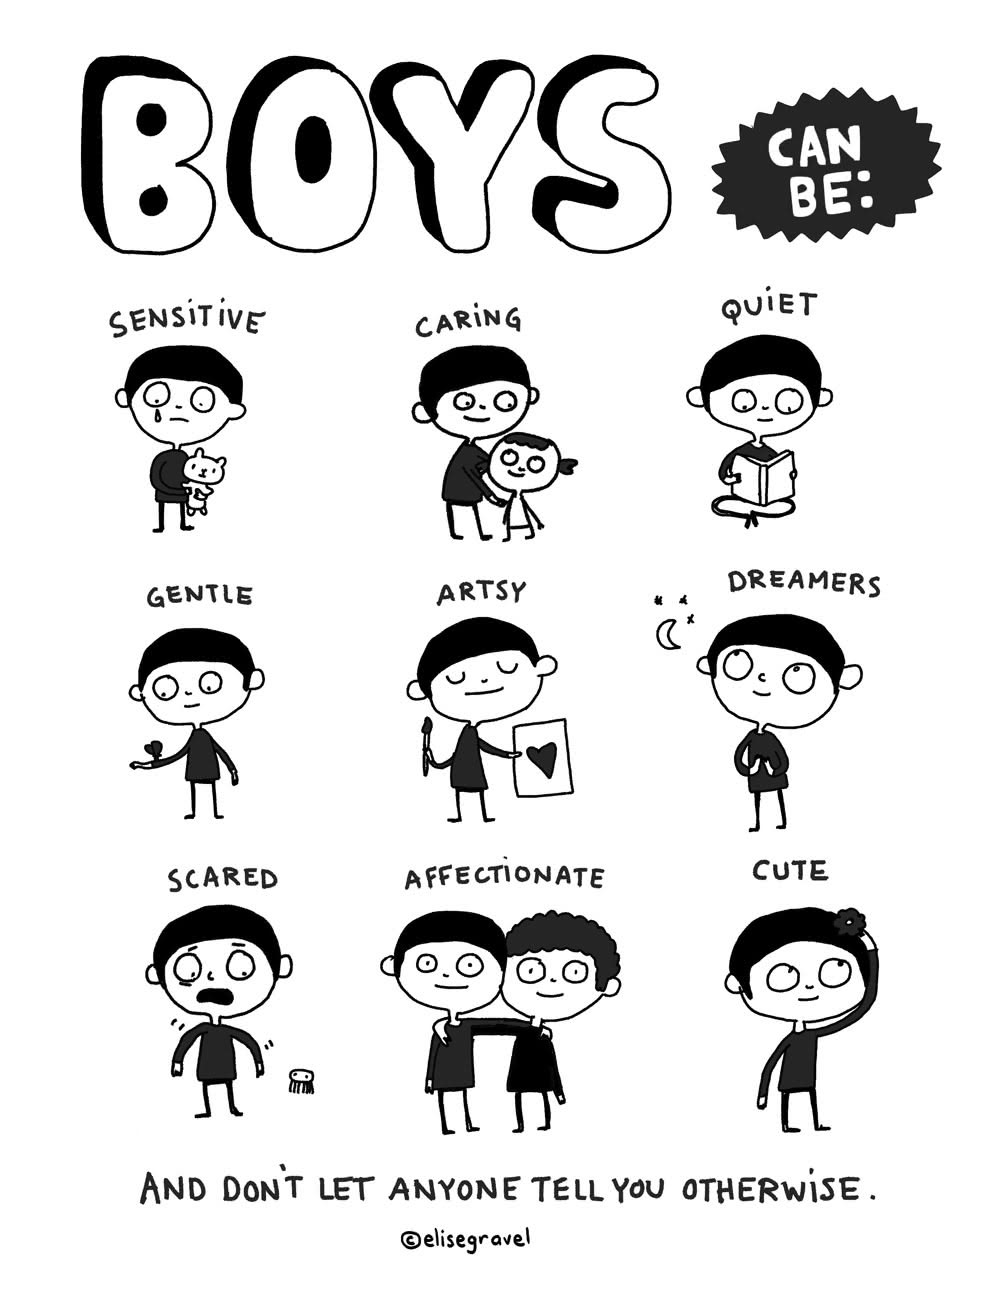 Boys can be